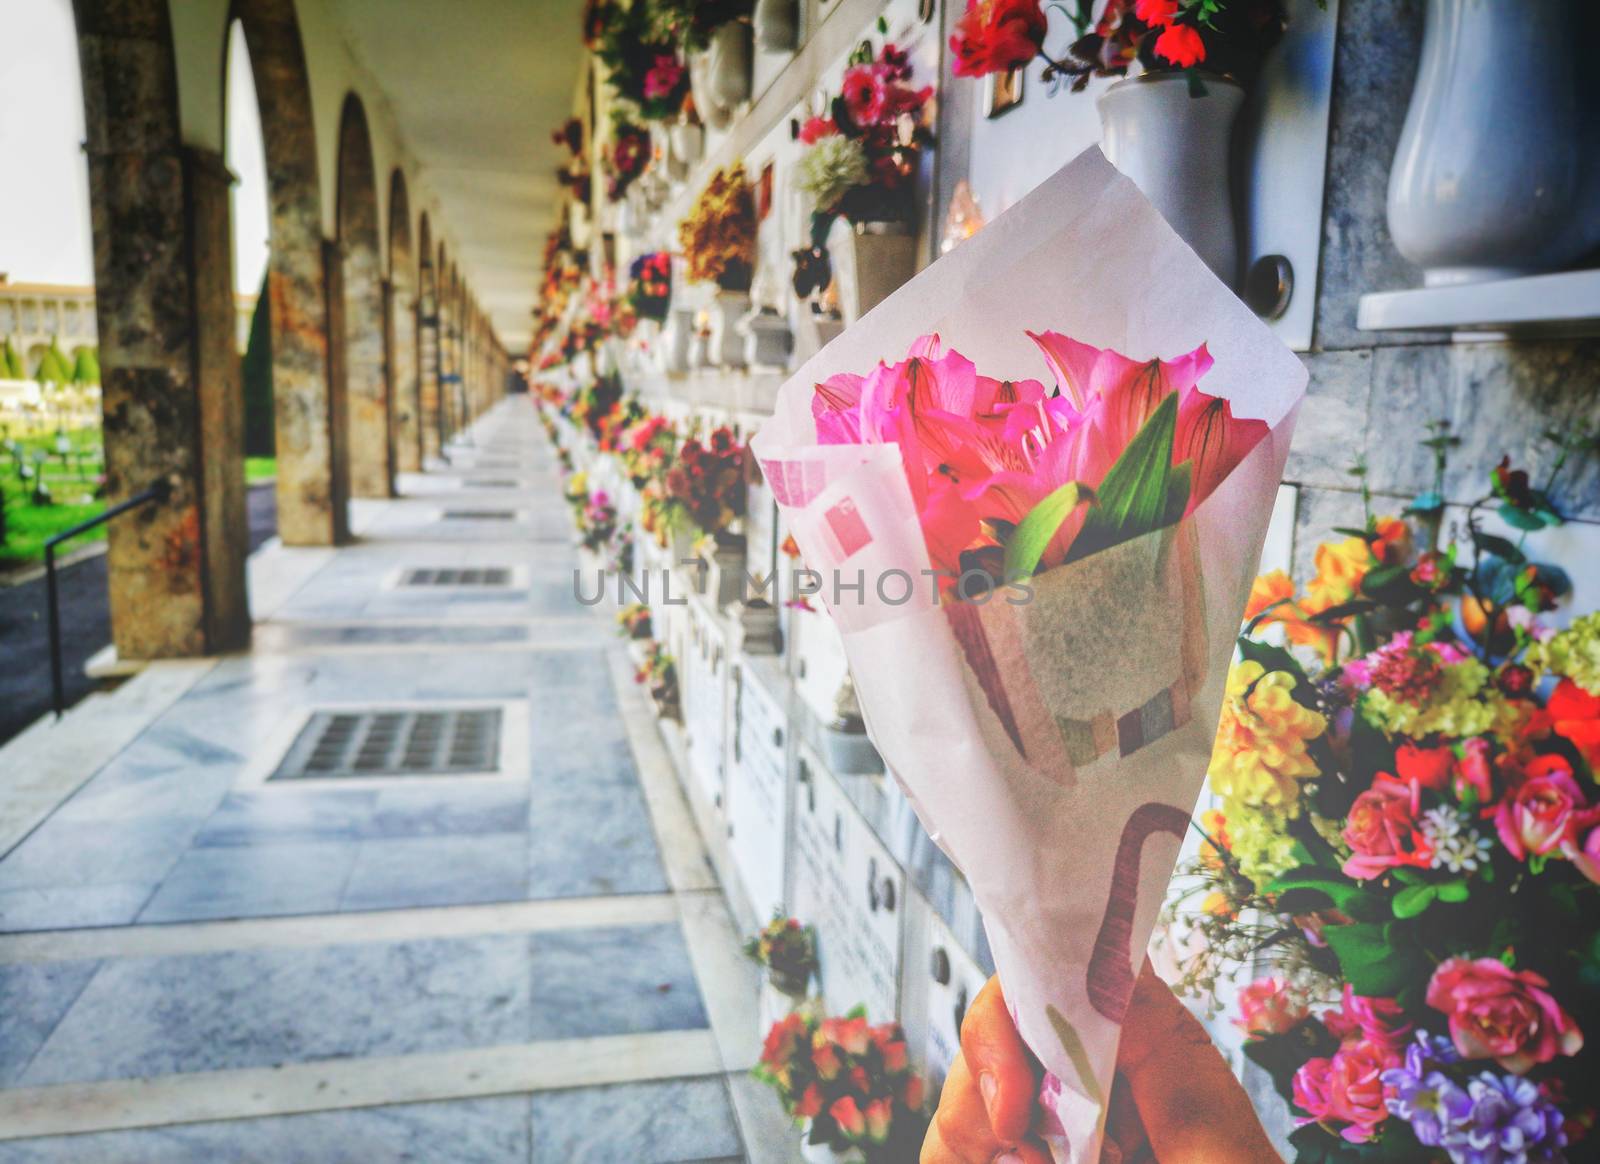 bring flowers to our loved ones at the cemetery during day of the dead by LucaLorenzelli